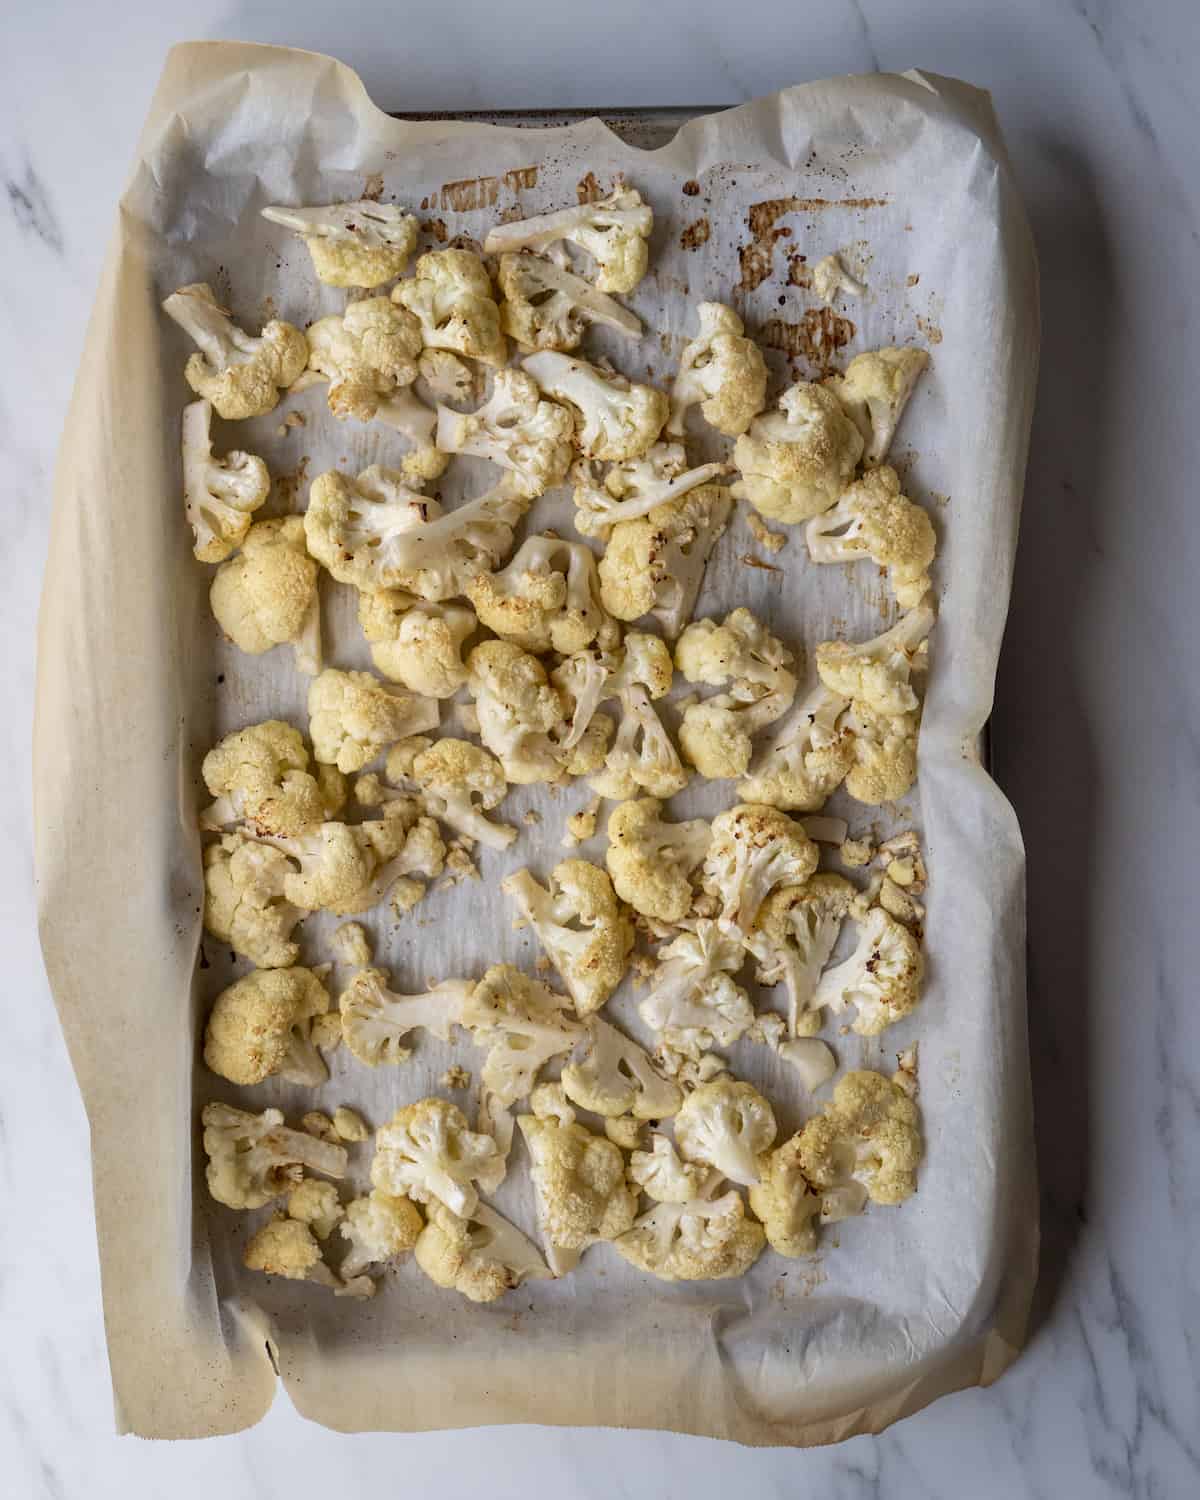 A parchment lined baking sheet with roasted cauliflower florets.